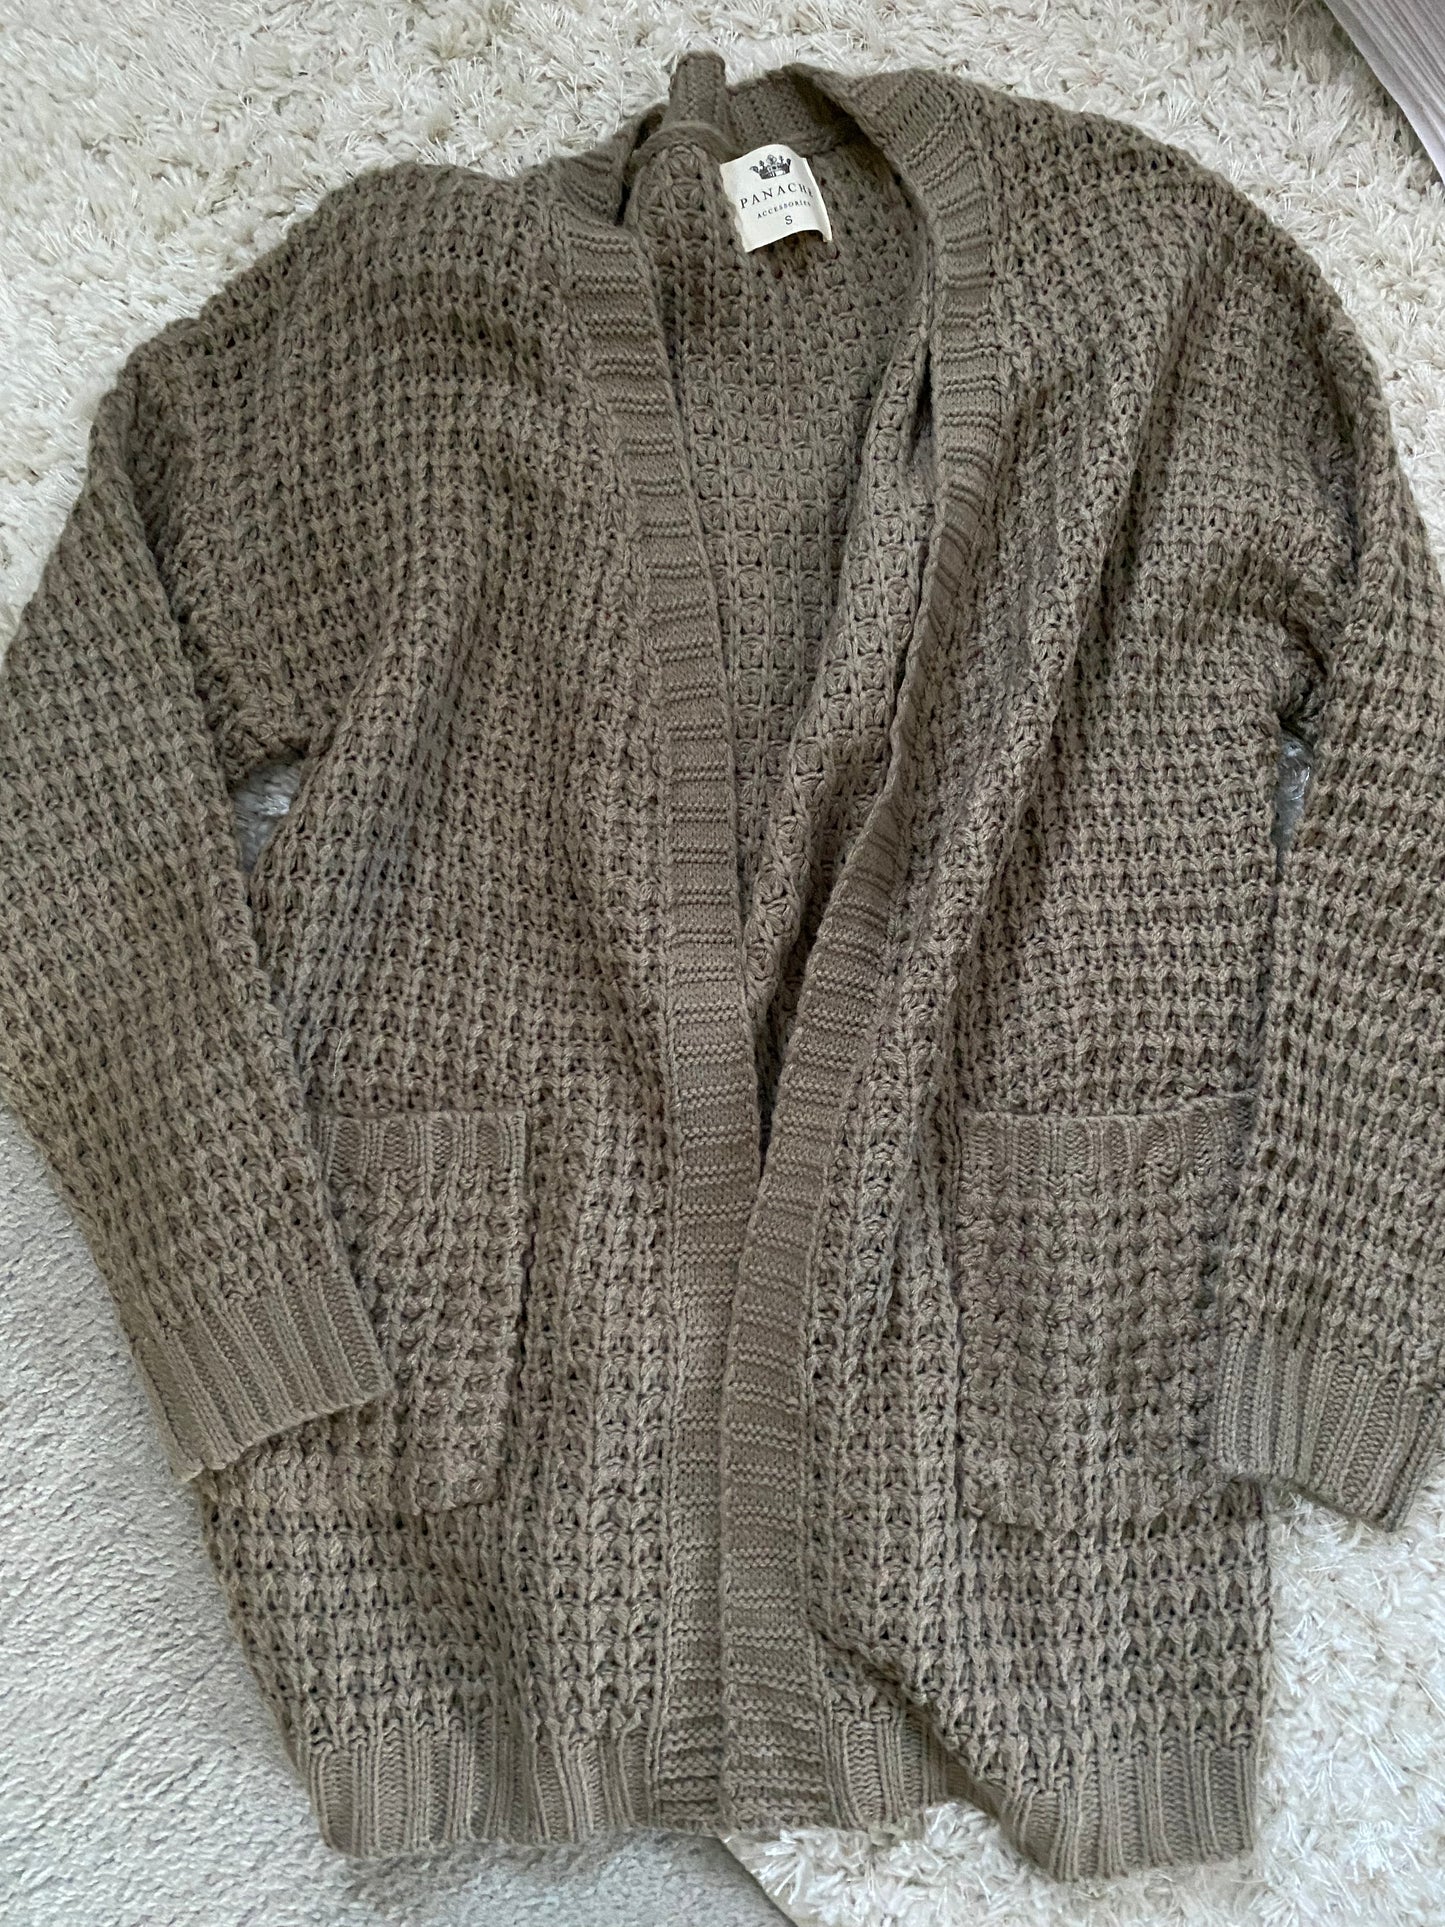 Cardigan sweater with pockets